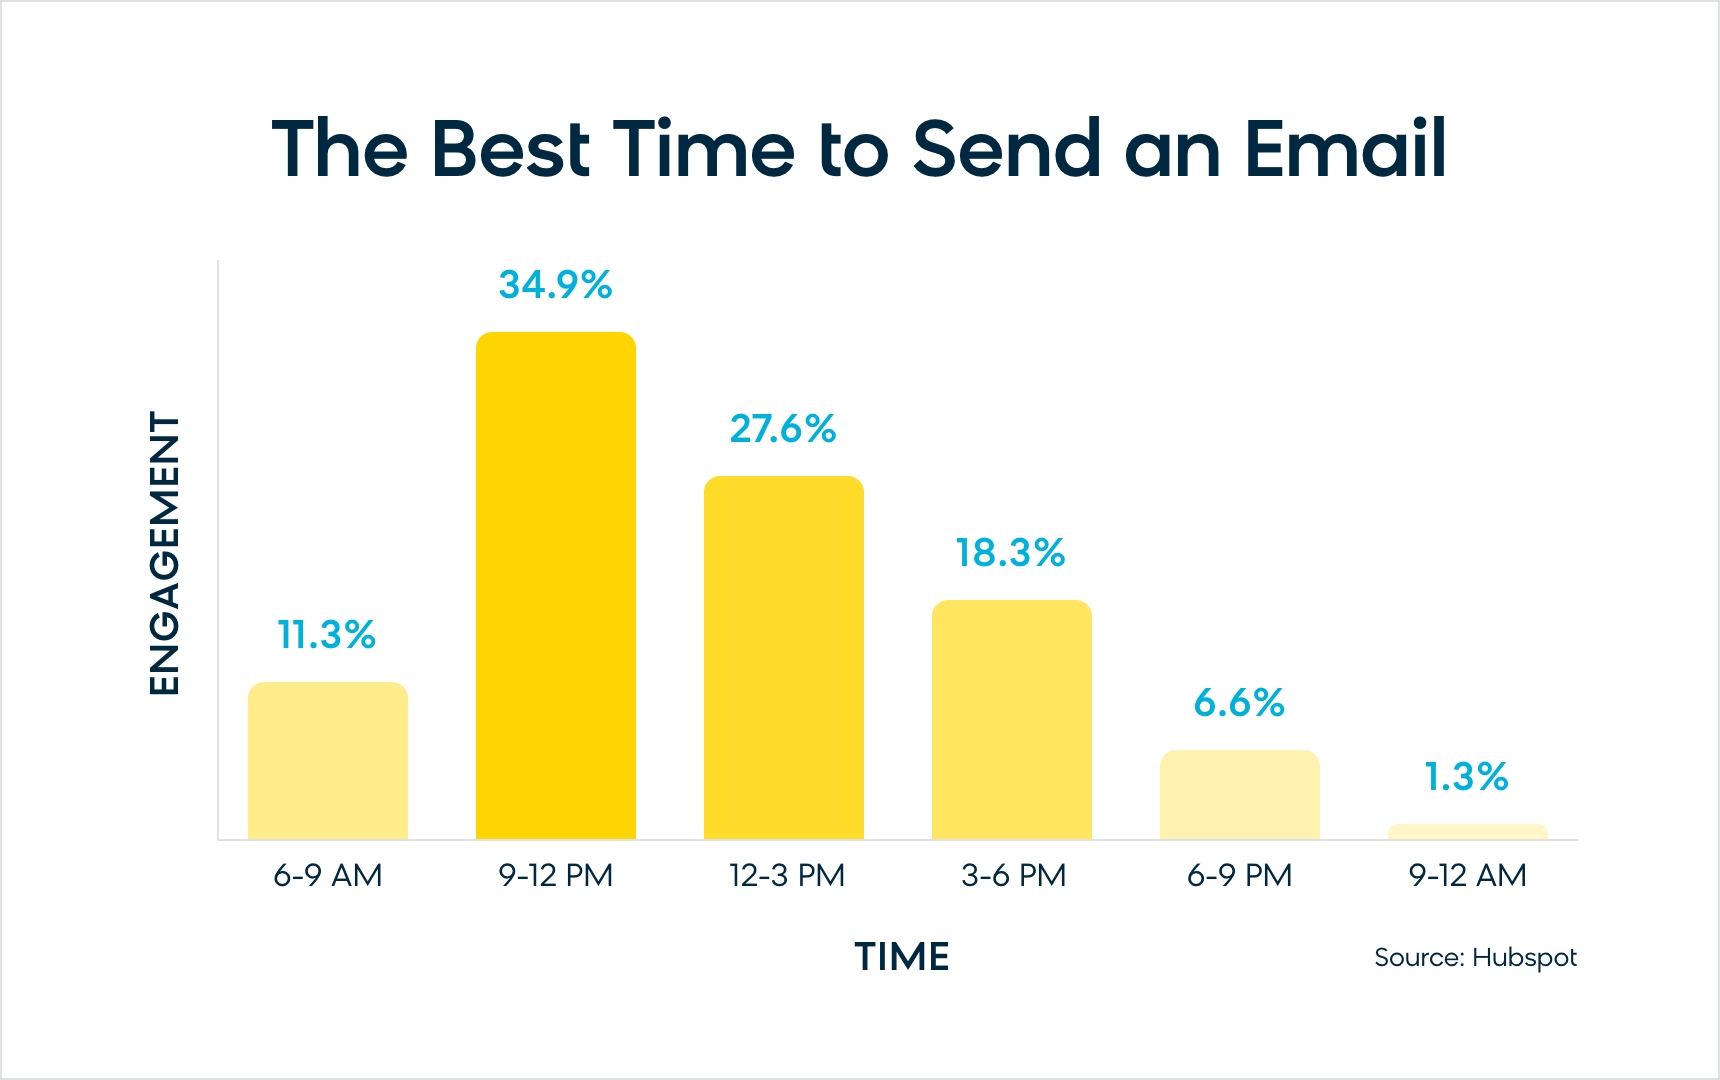 To reach and engage with the greatest majority of your audience, studies show it’s best to send emails between 9 a.m. and noon